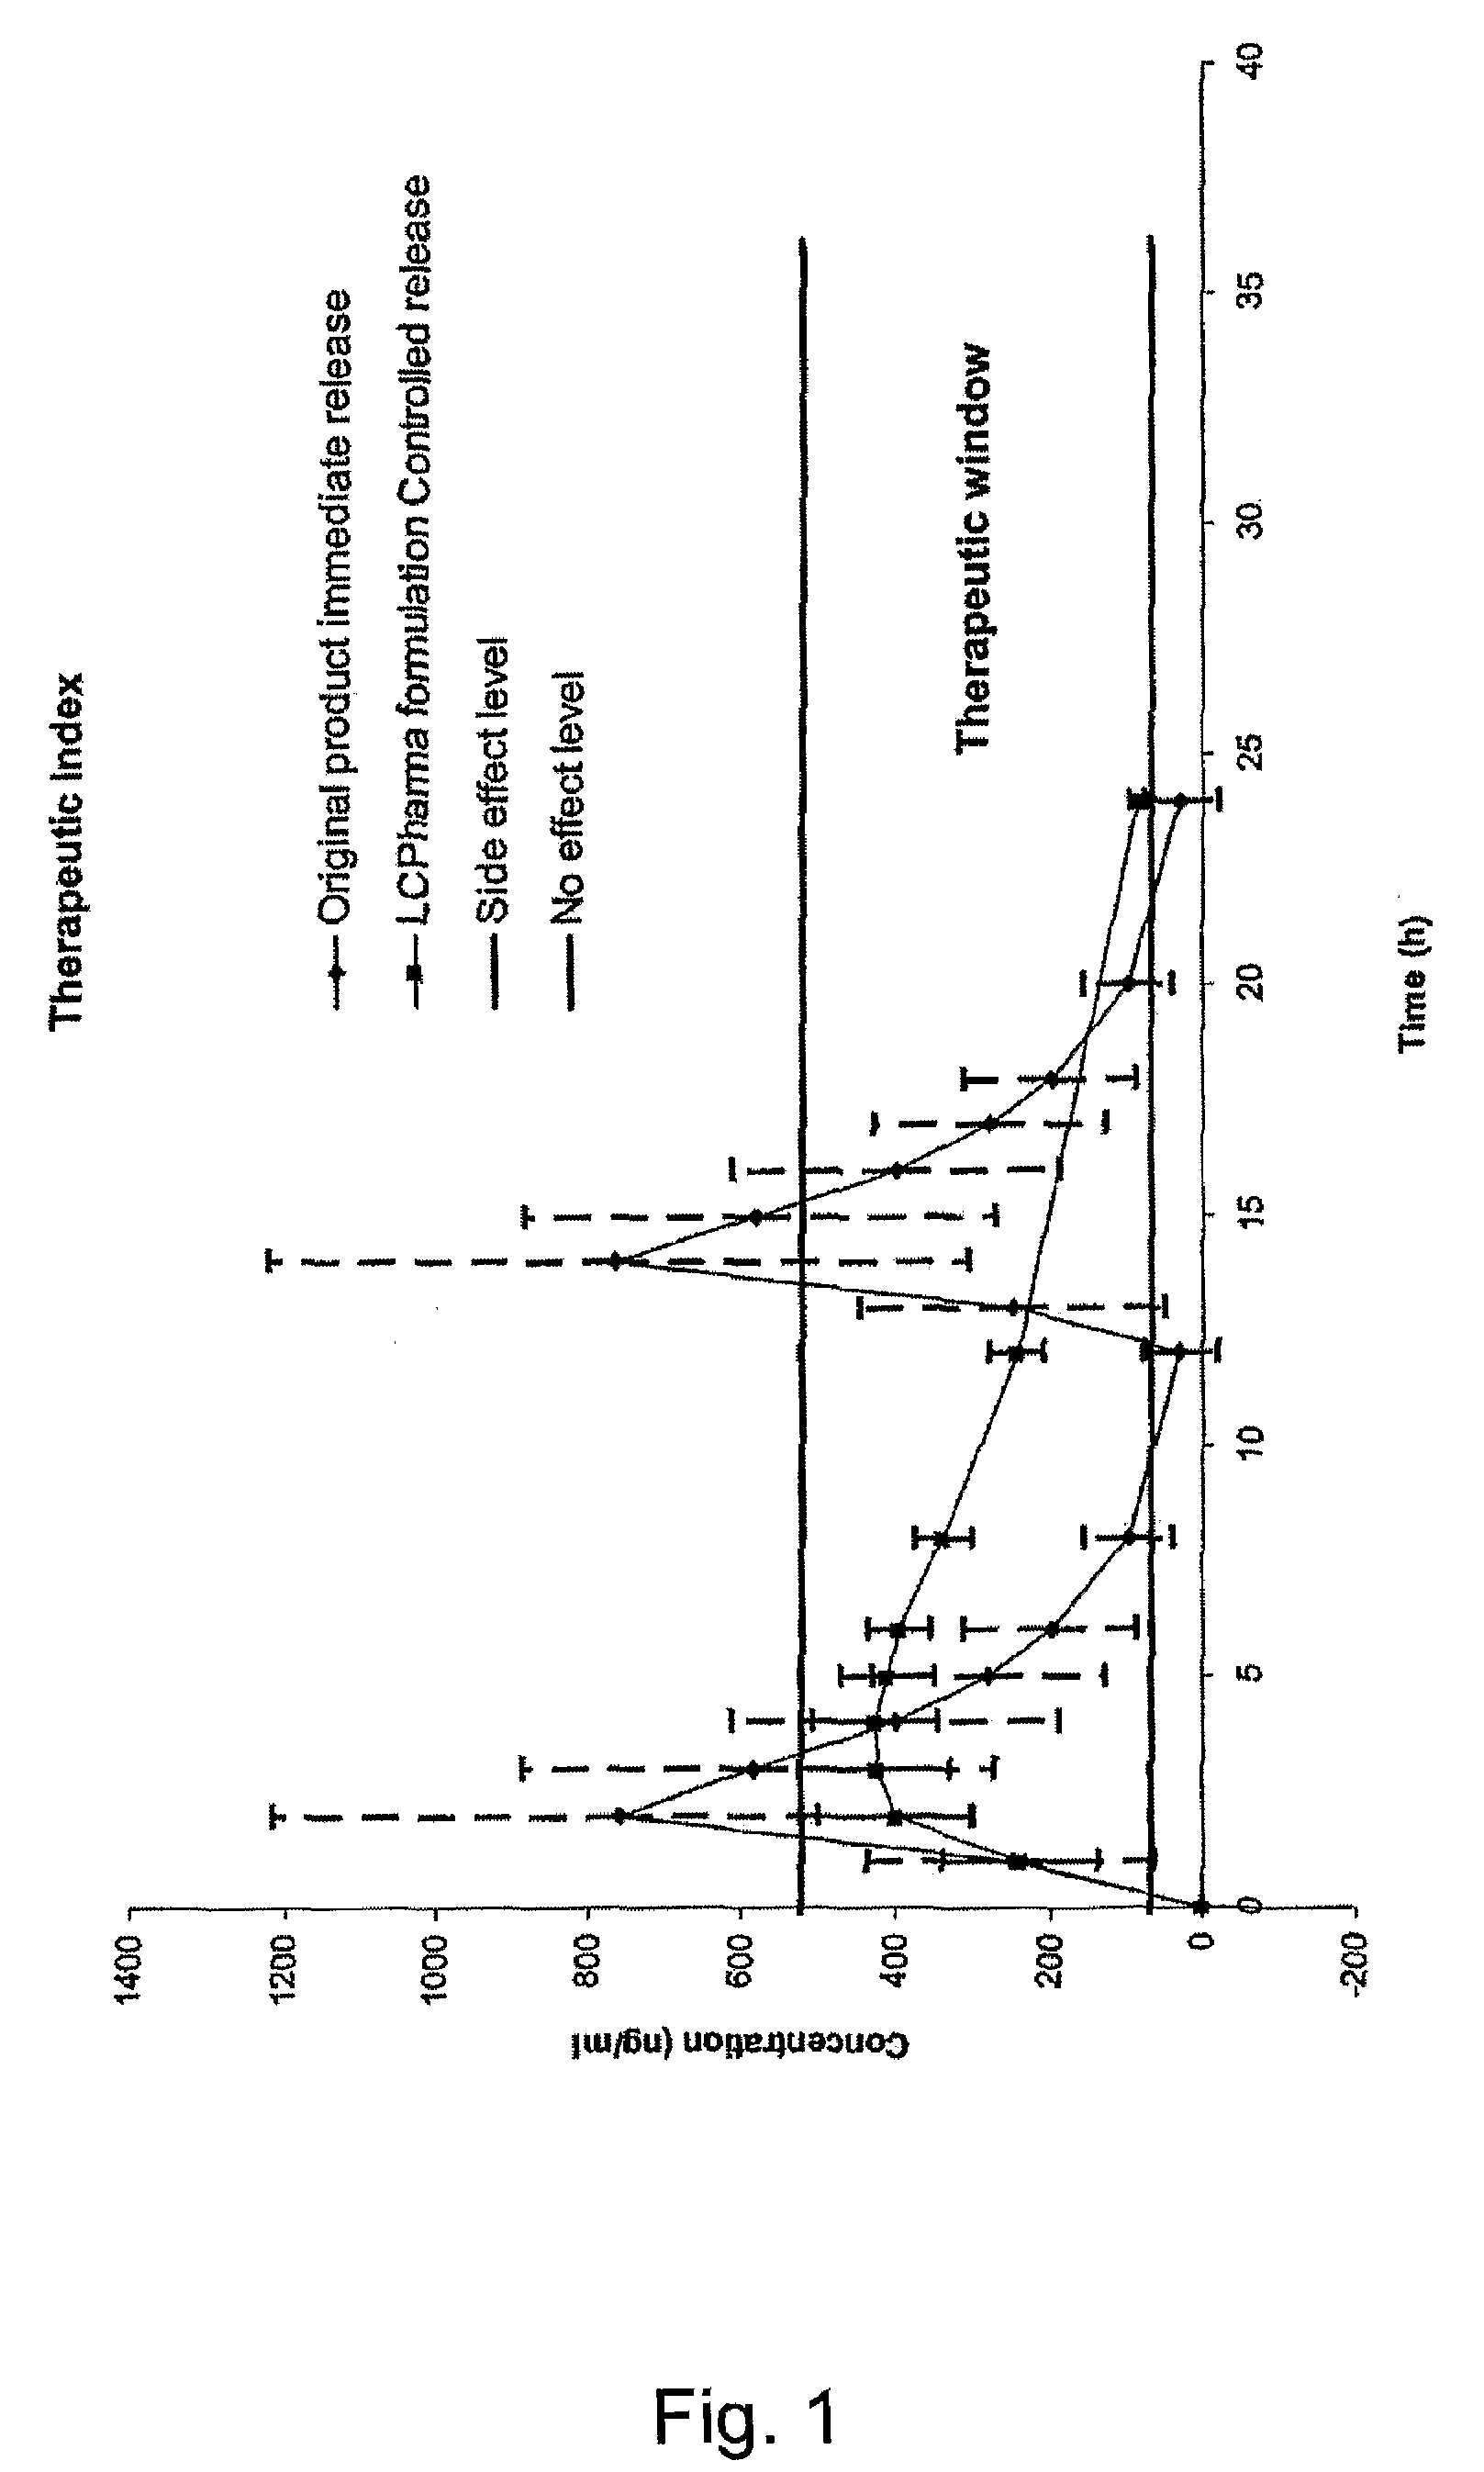 Pharmaceutical Compositions Comprising Sirolimus and/or an Analogue Thereof